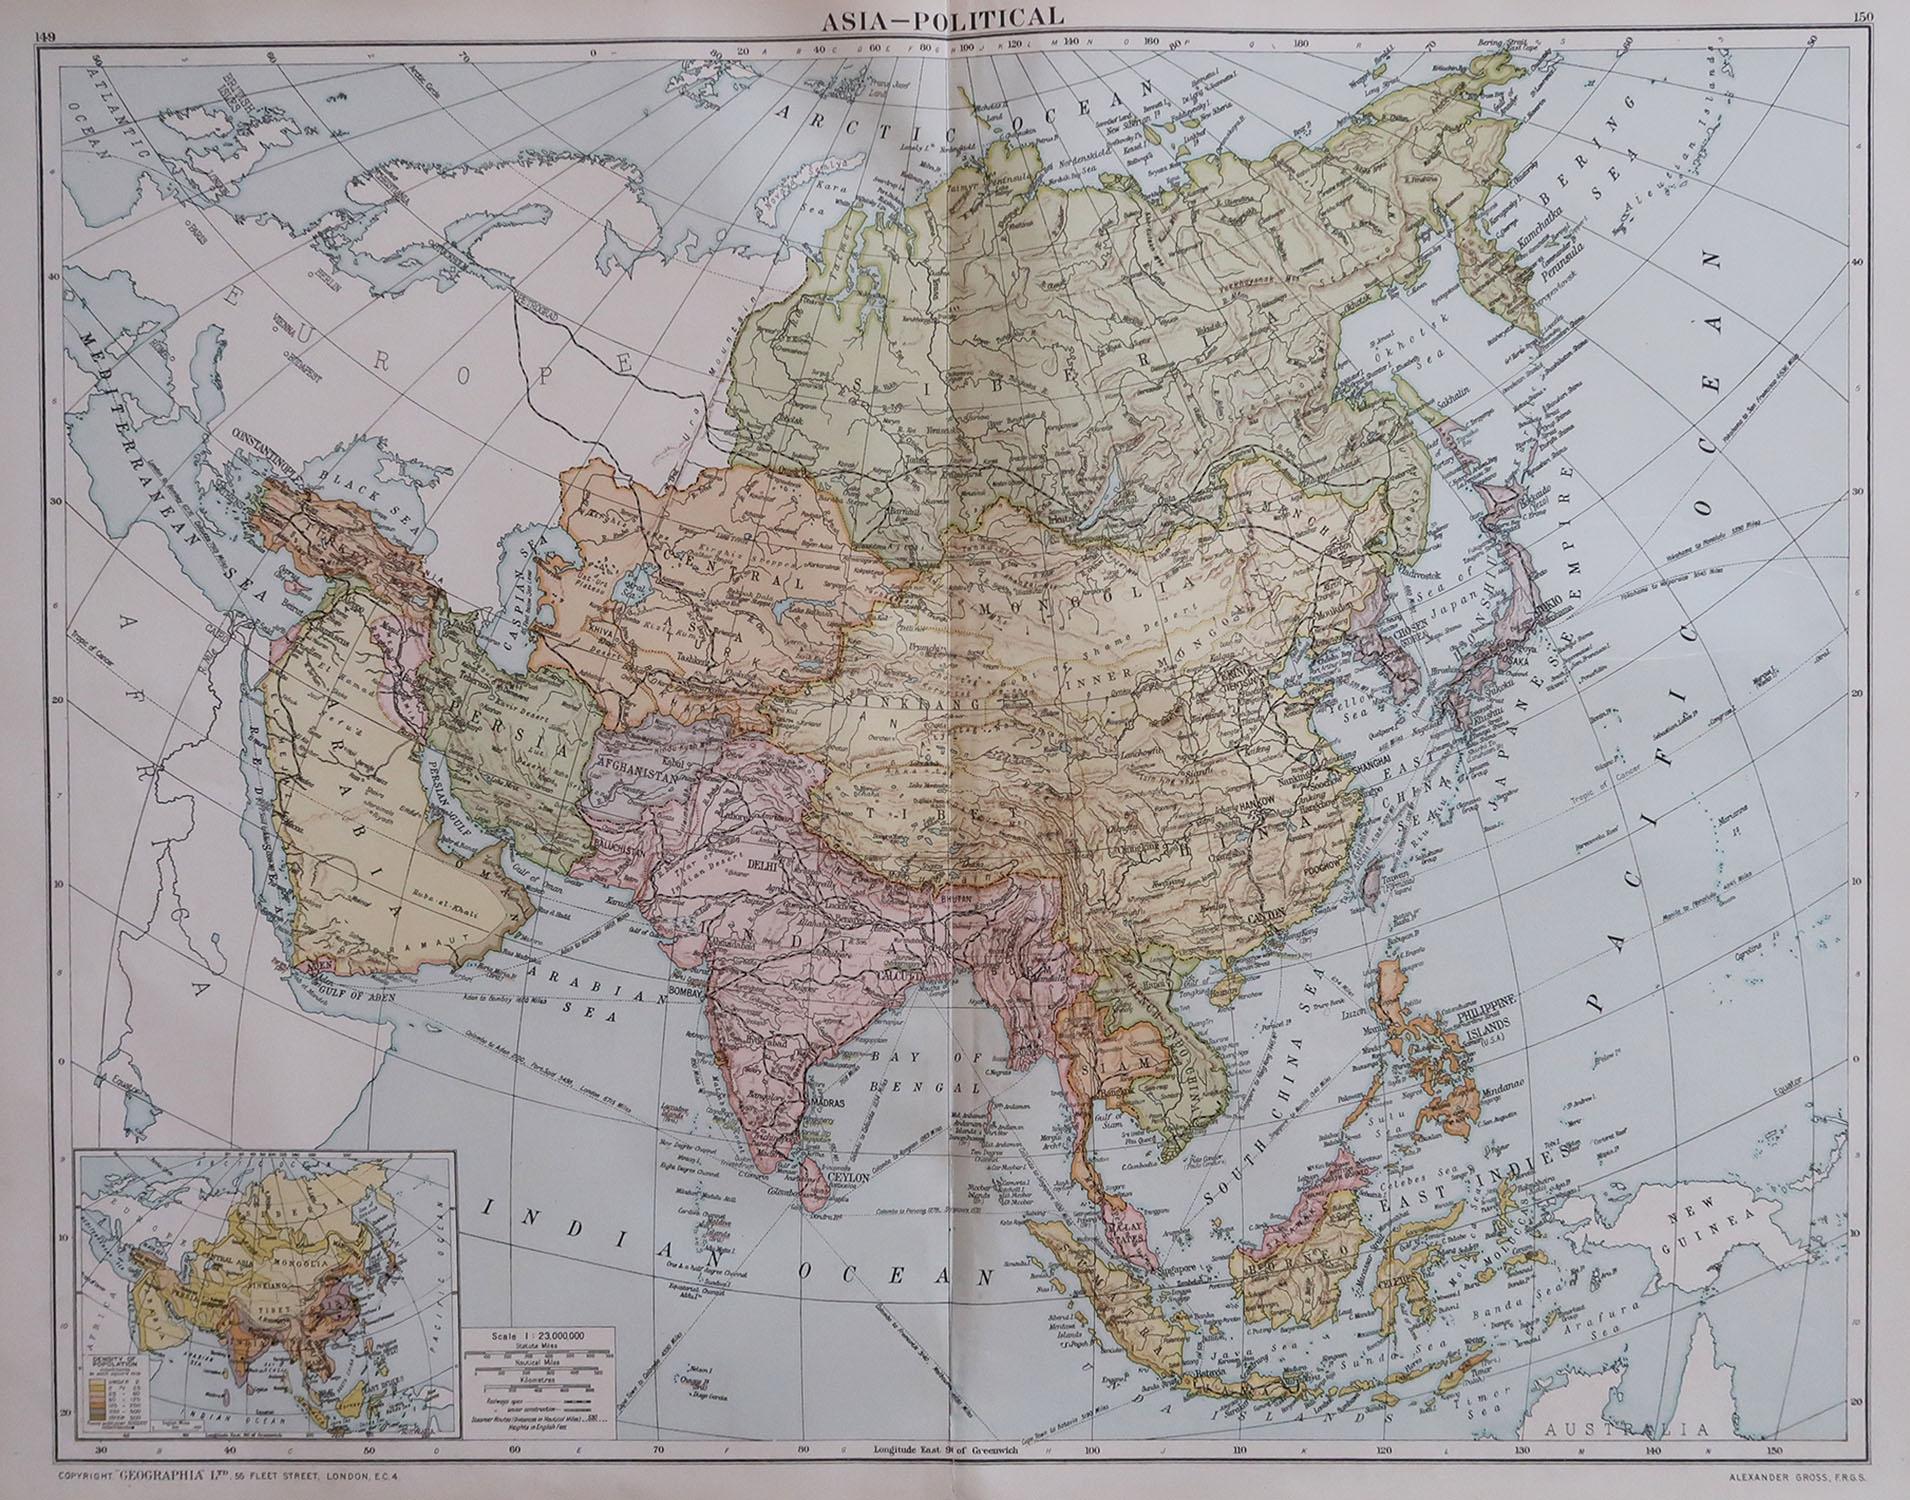 Great map of Asia

Original color. 

Good condition 

Published by Alexander Gross

Unframed.








